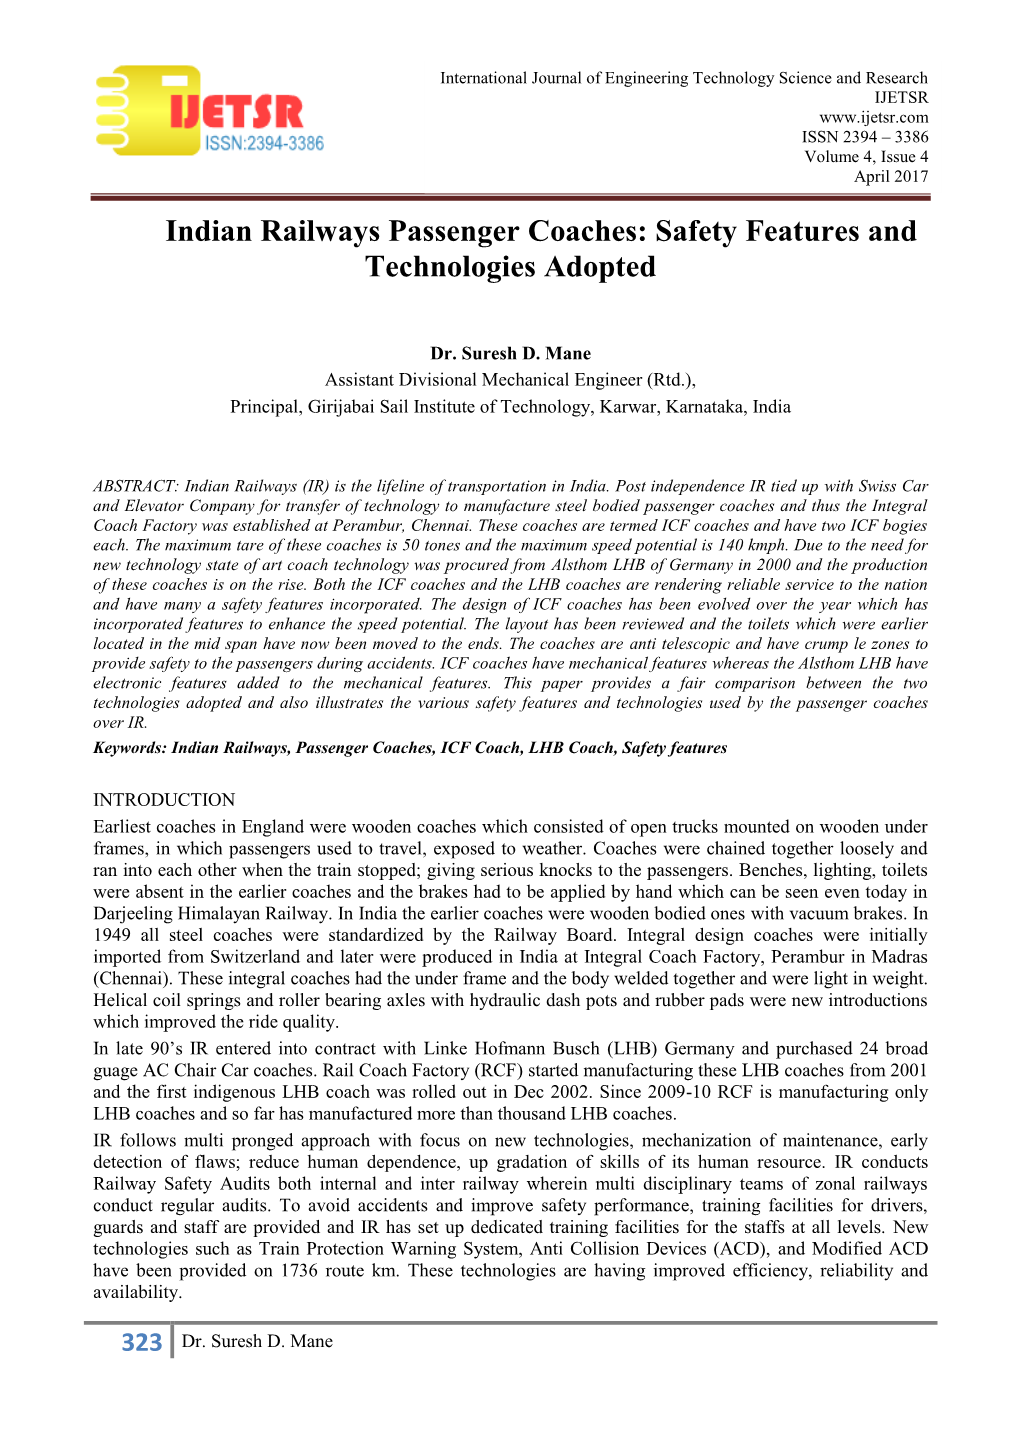 Indian Railways Passenger Coaches: Safety Features and Technologies Adopted